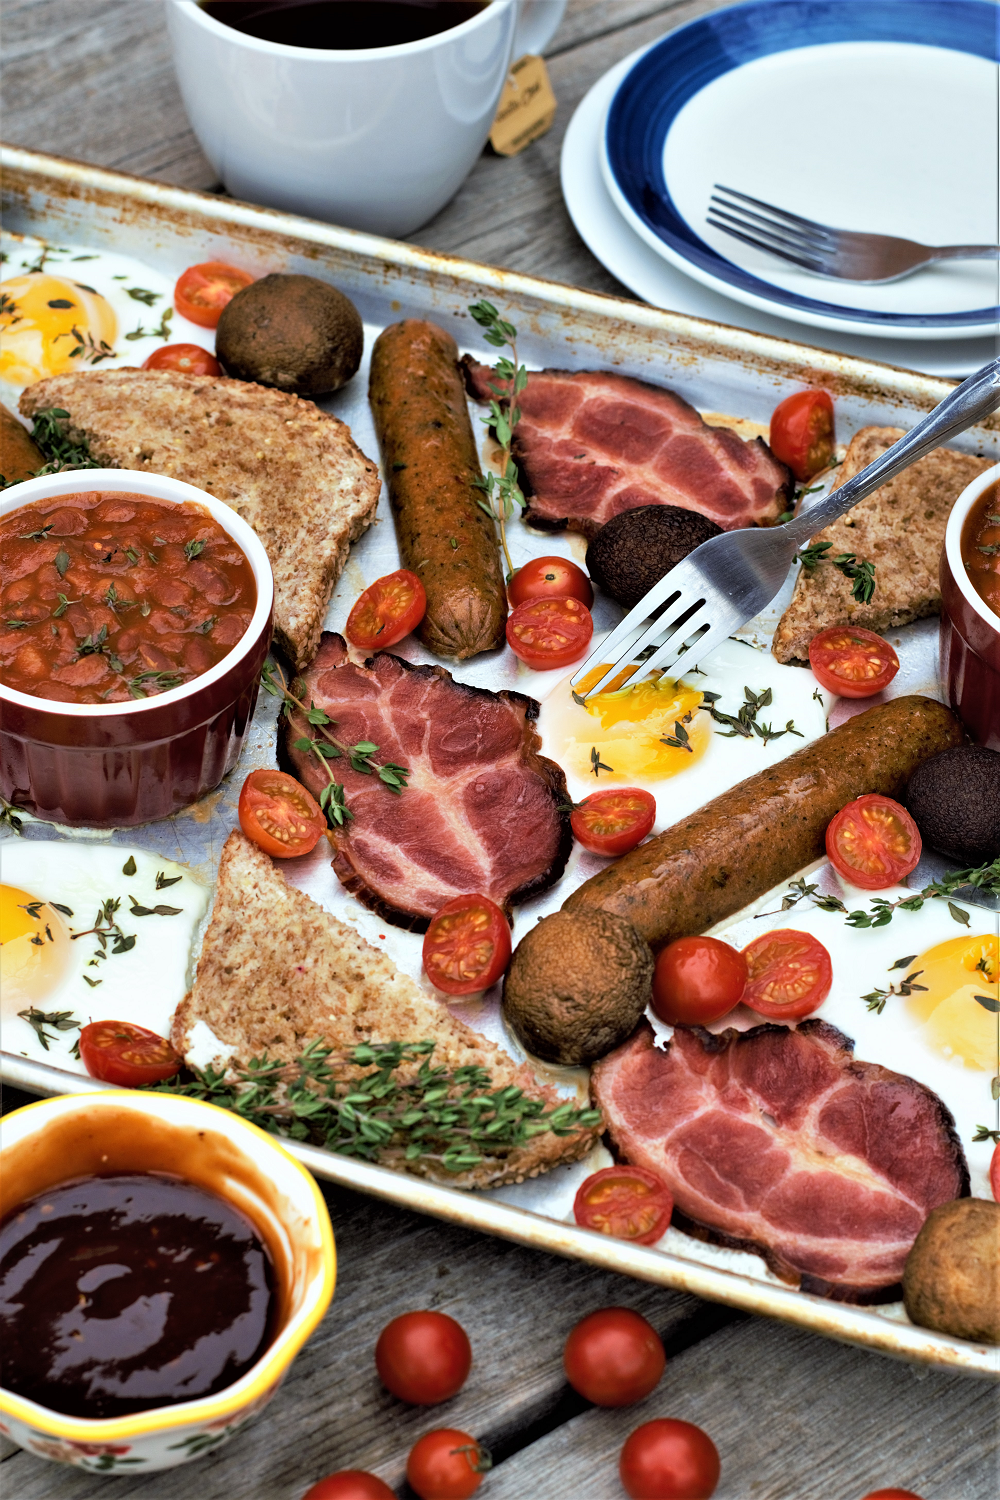 (Almost) full english breakfast for two, all baked together on a sheet pan in 15 minutes! Perfect weekend brunch or mid-week surprise for a wonderful morning treat.